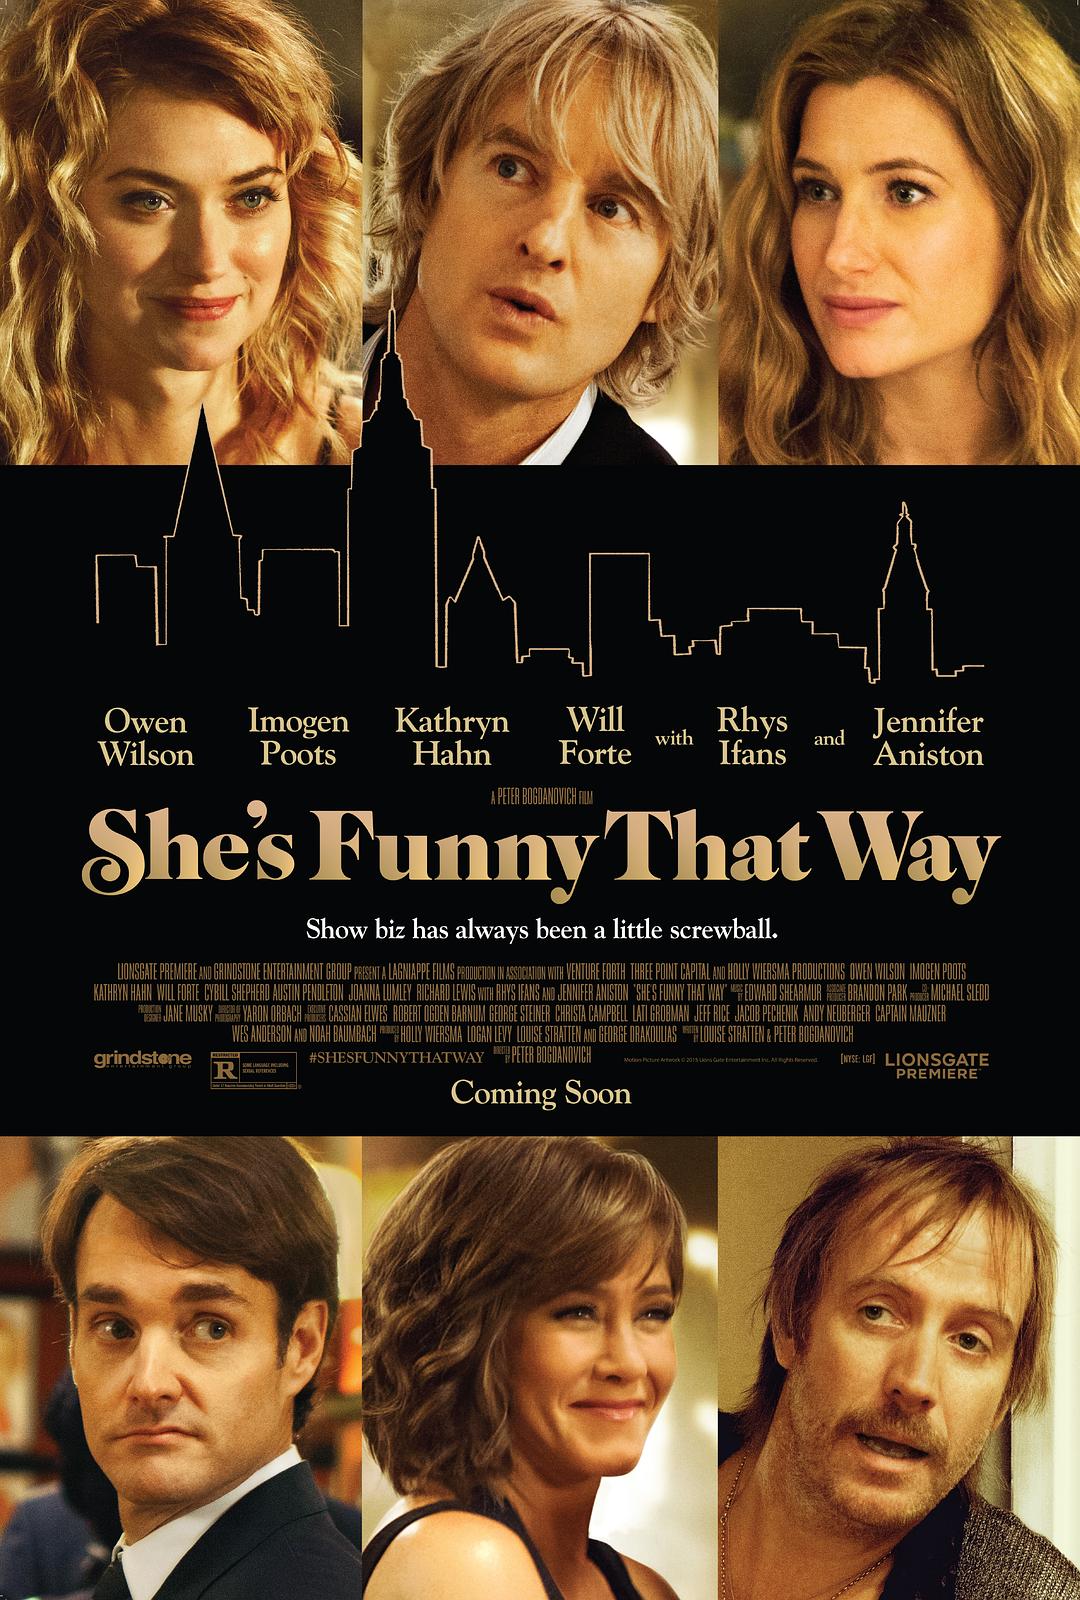  Shes.Funny.That.Way.2014.LIMITED.1080p.BluRay.x264-USURY 6.64GB-1.jpeg